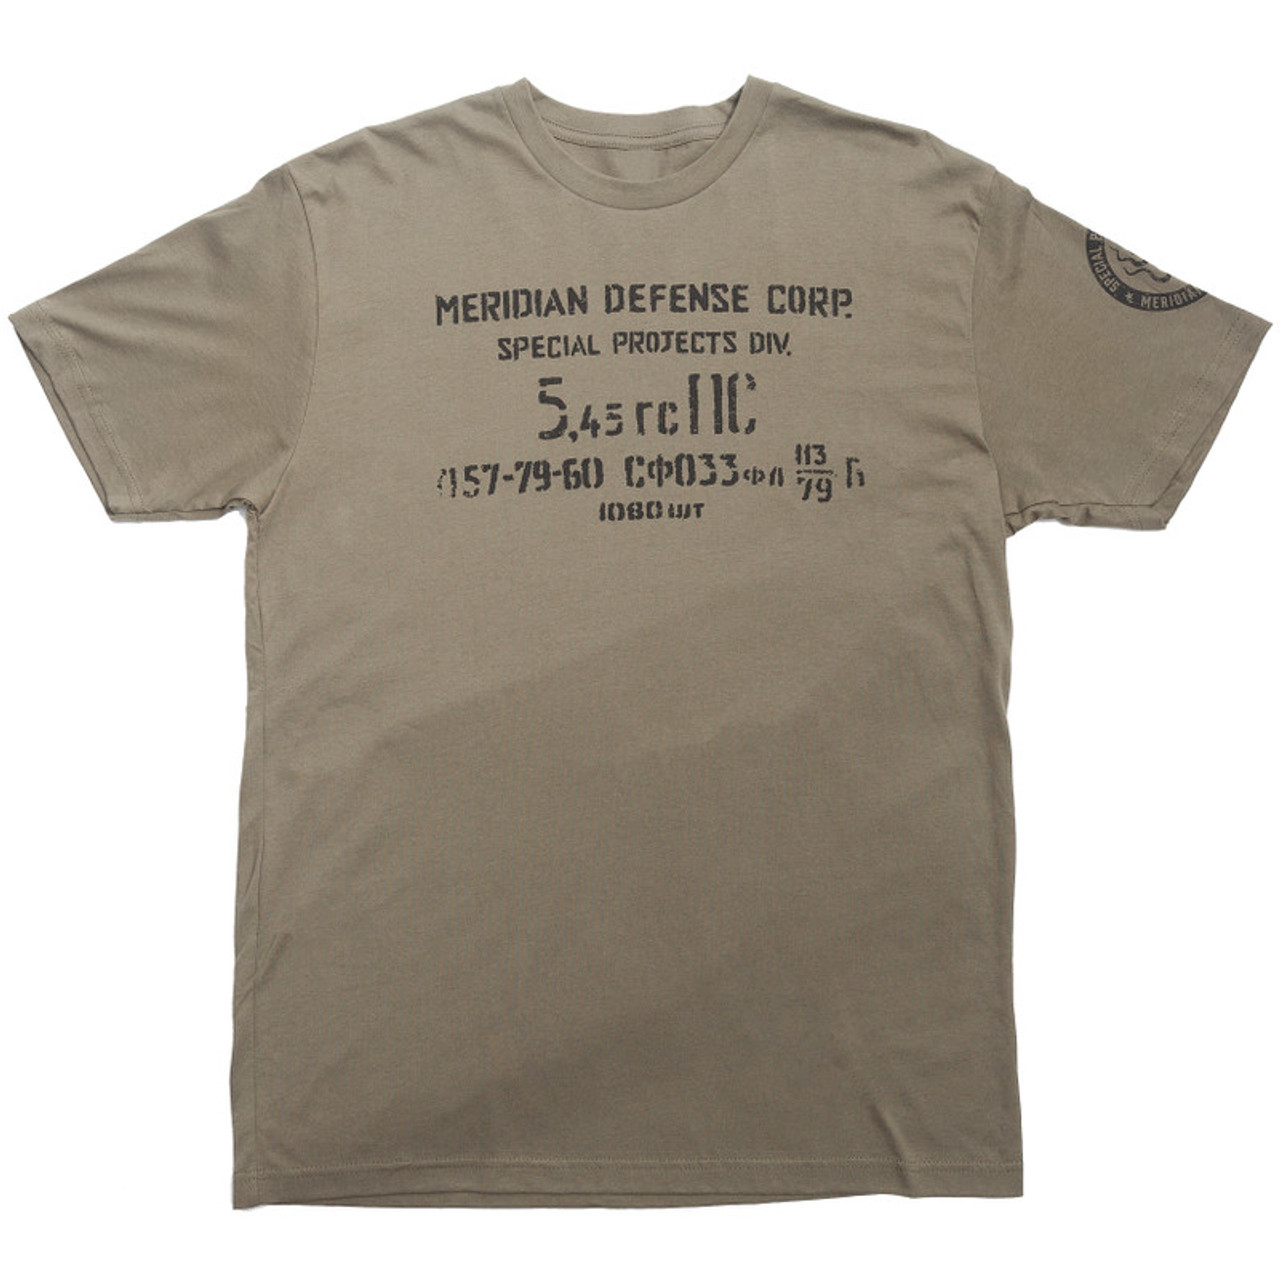 5.45 x 39 Spam Can T-Shirt - Meridian Defense Corp